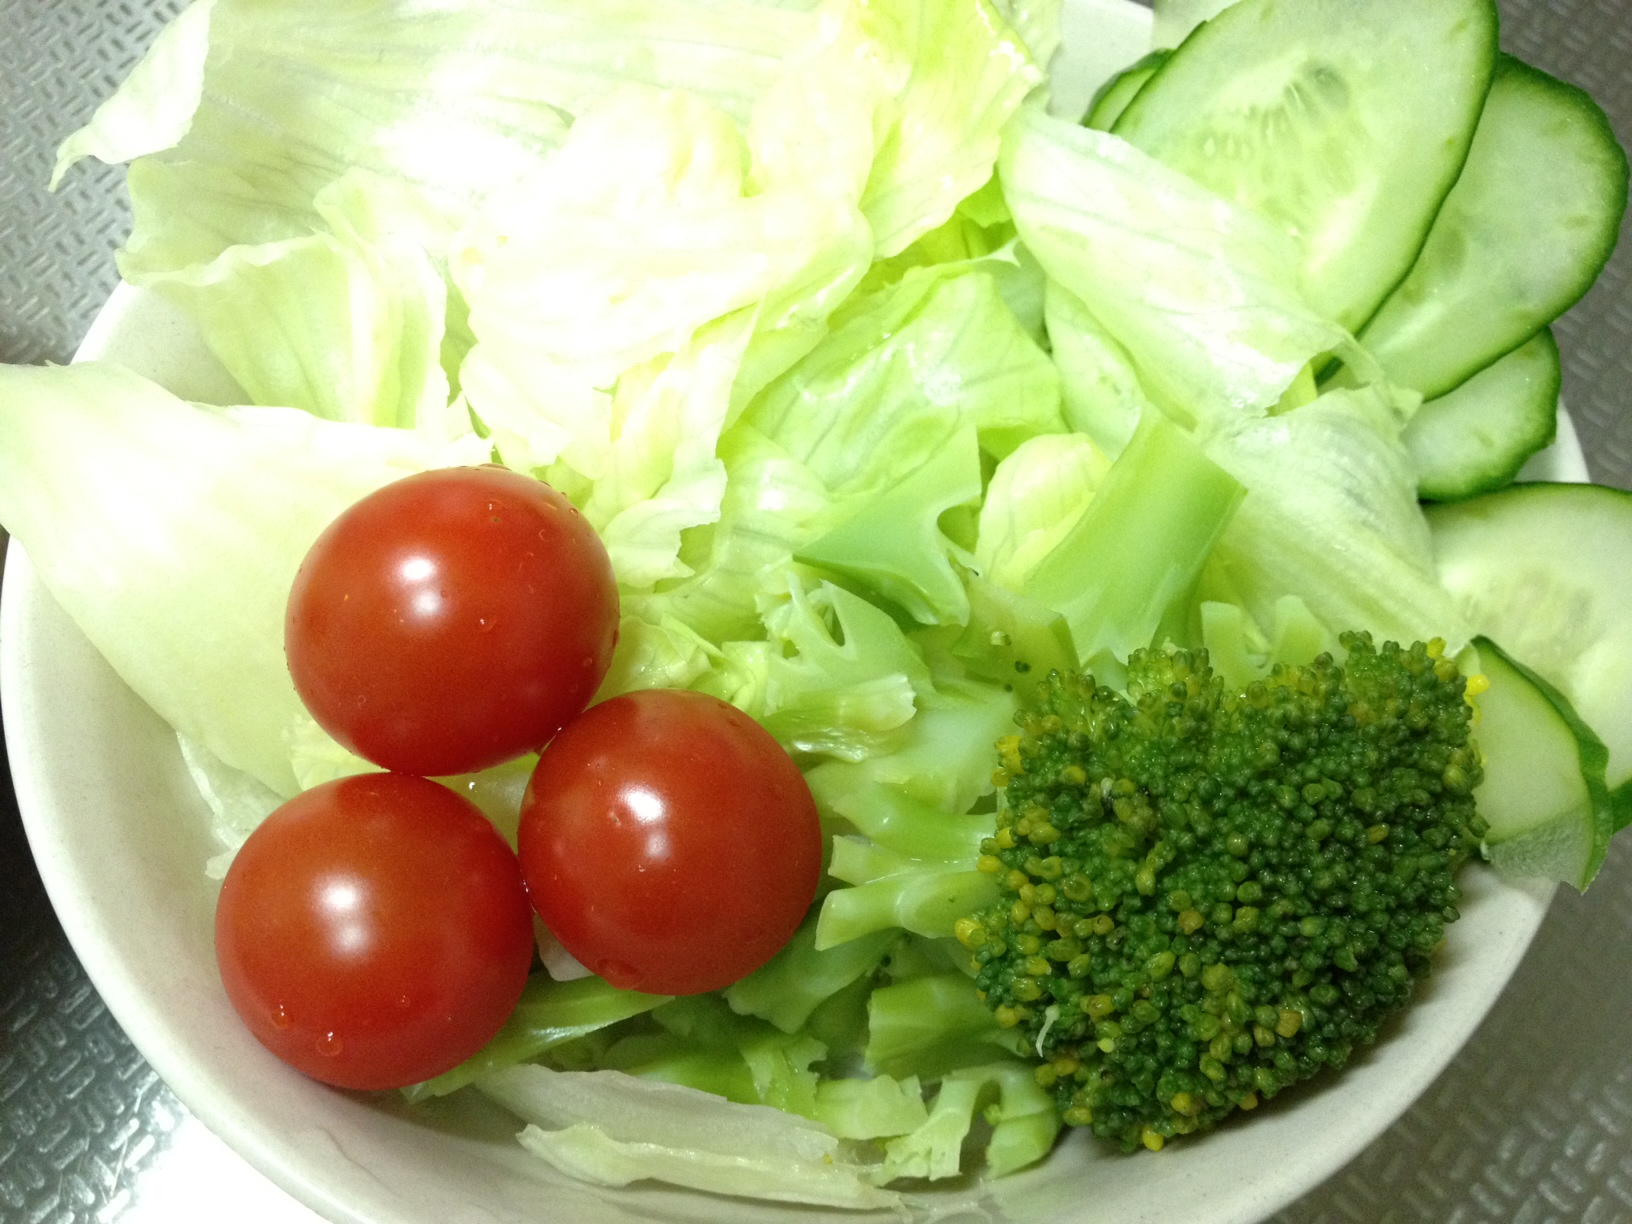 a white bowl with tomatoes, broccoli and lettuce